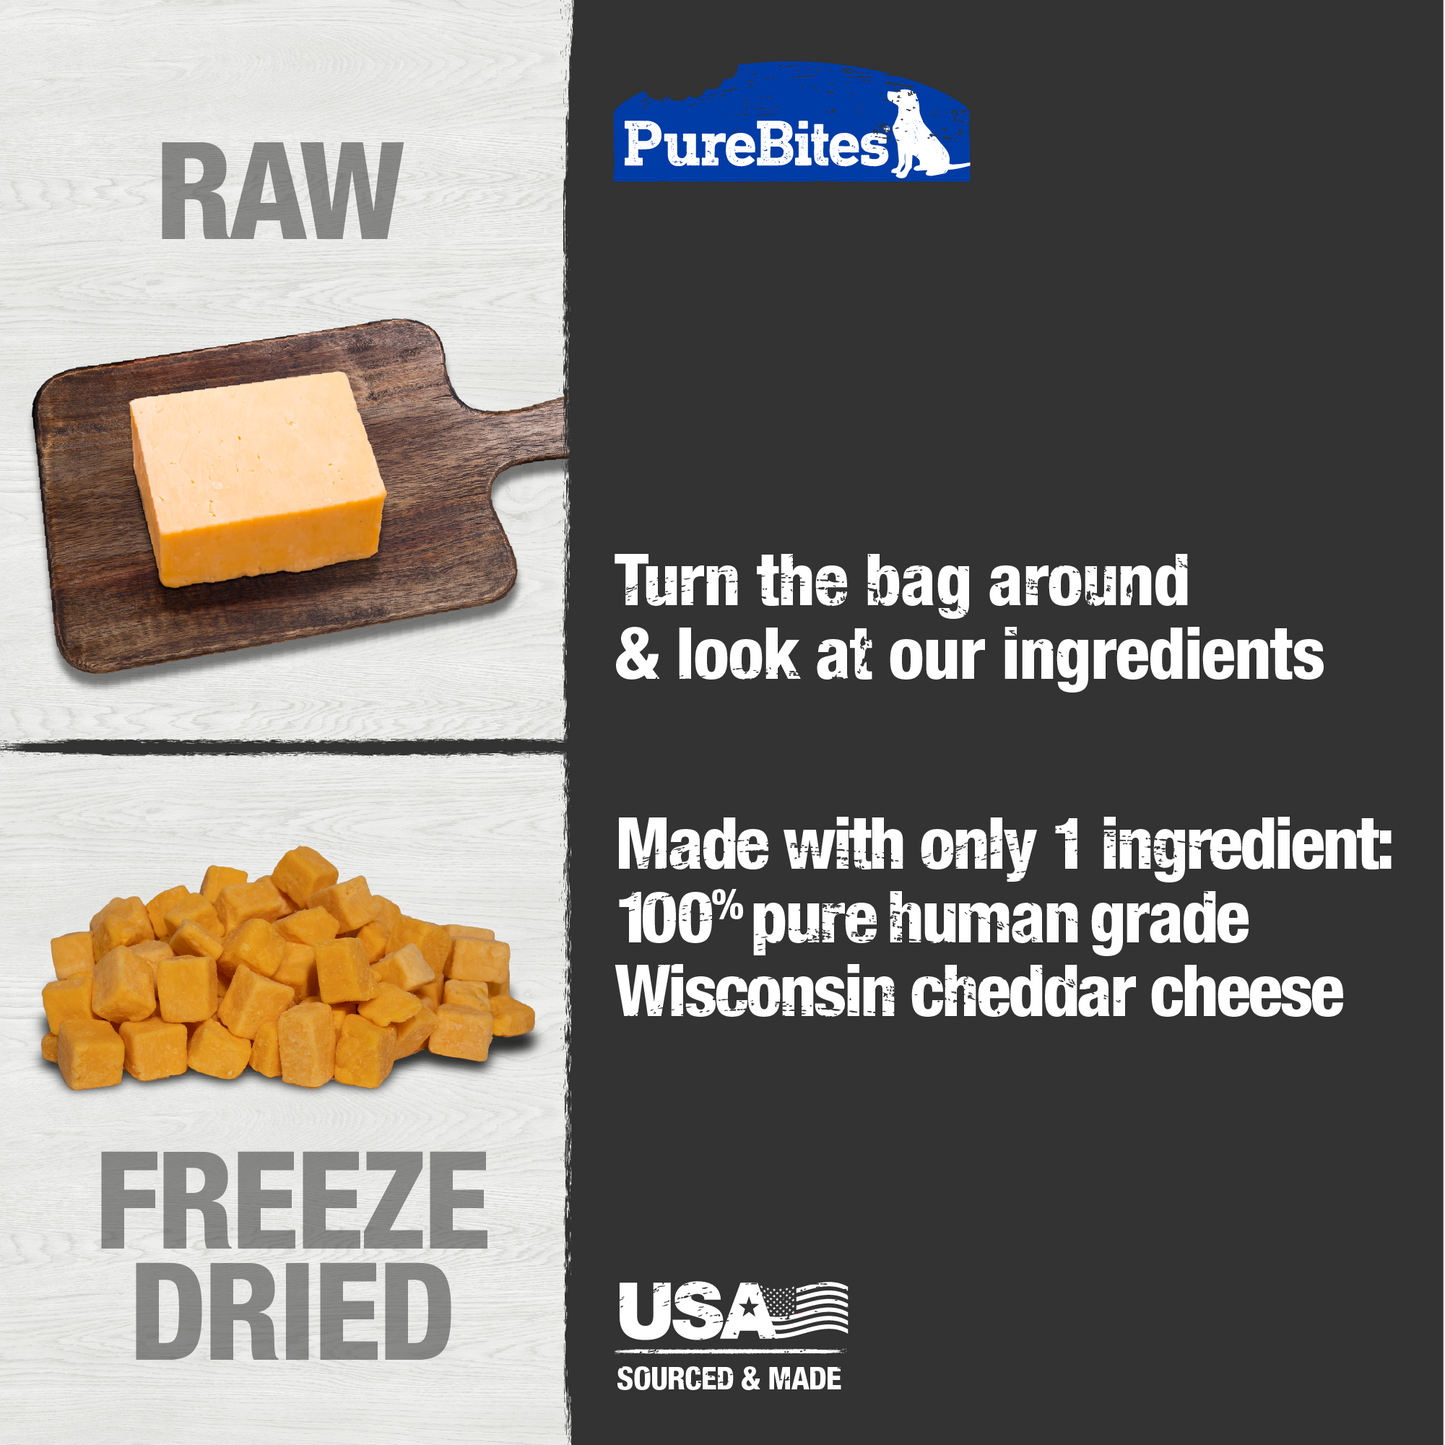 Made with only 1 Ingredient you can read, pronounce, and trust: USA sourced human grade cheddar cheese.